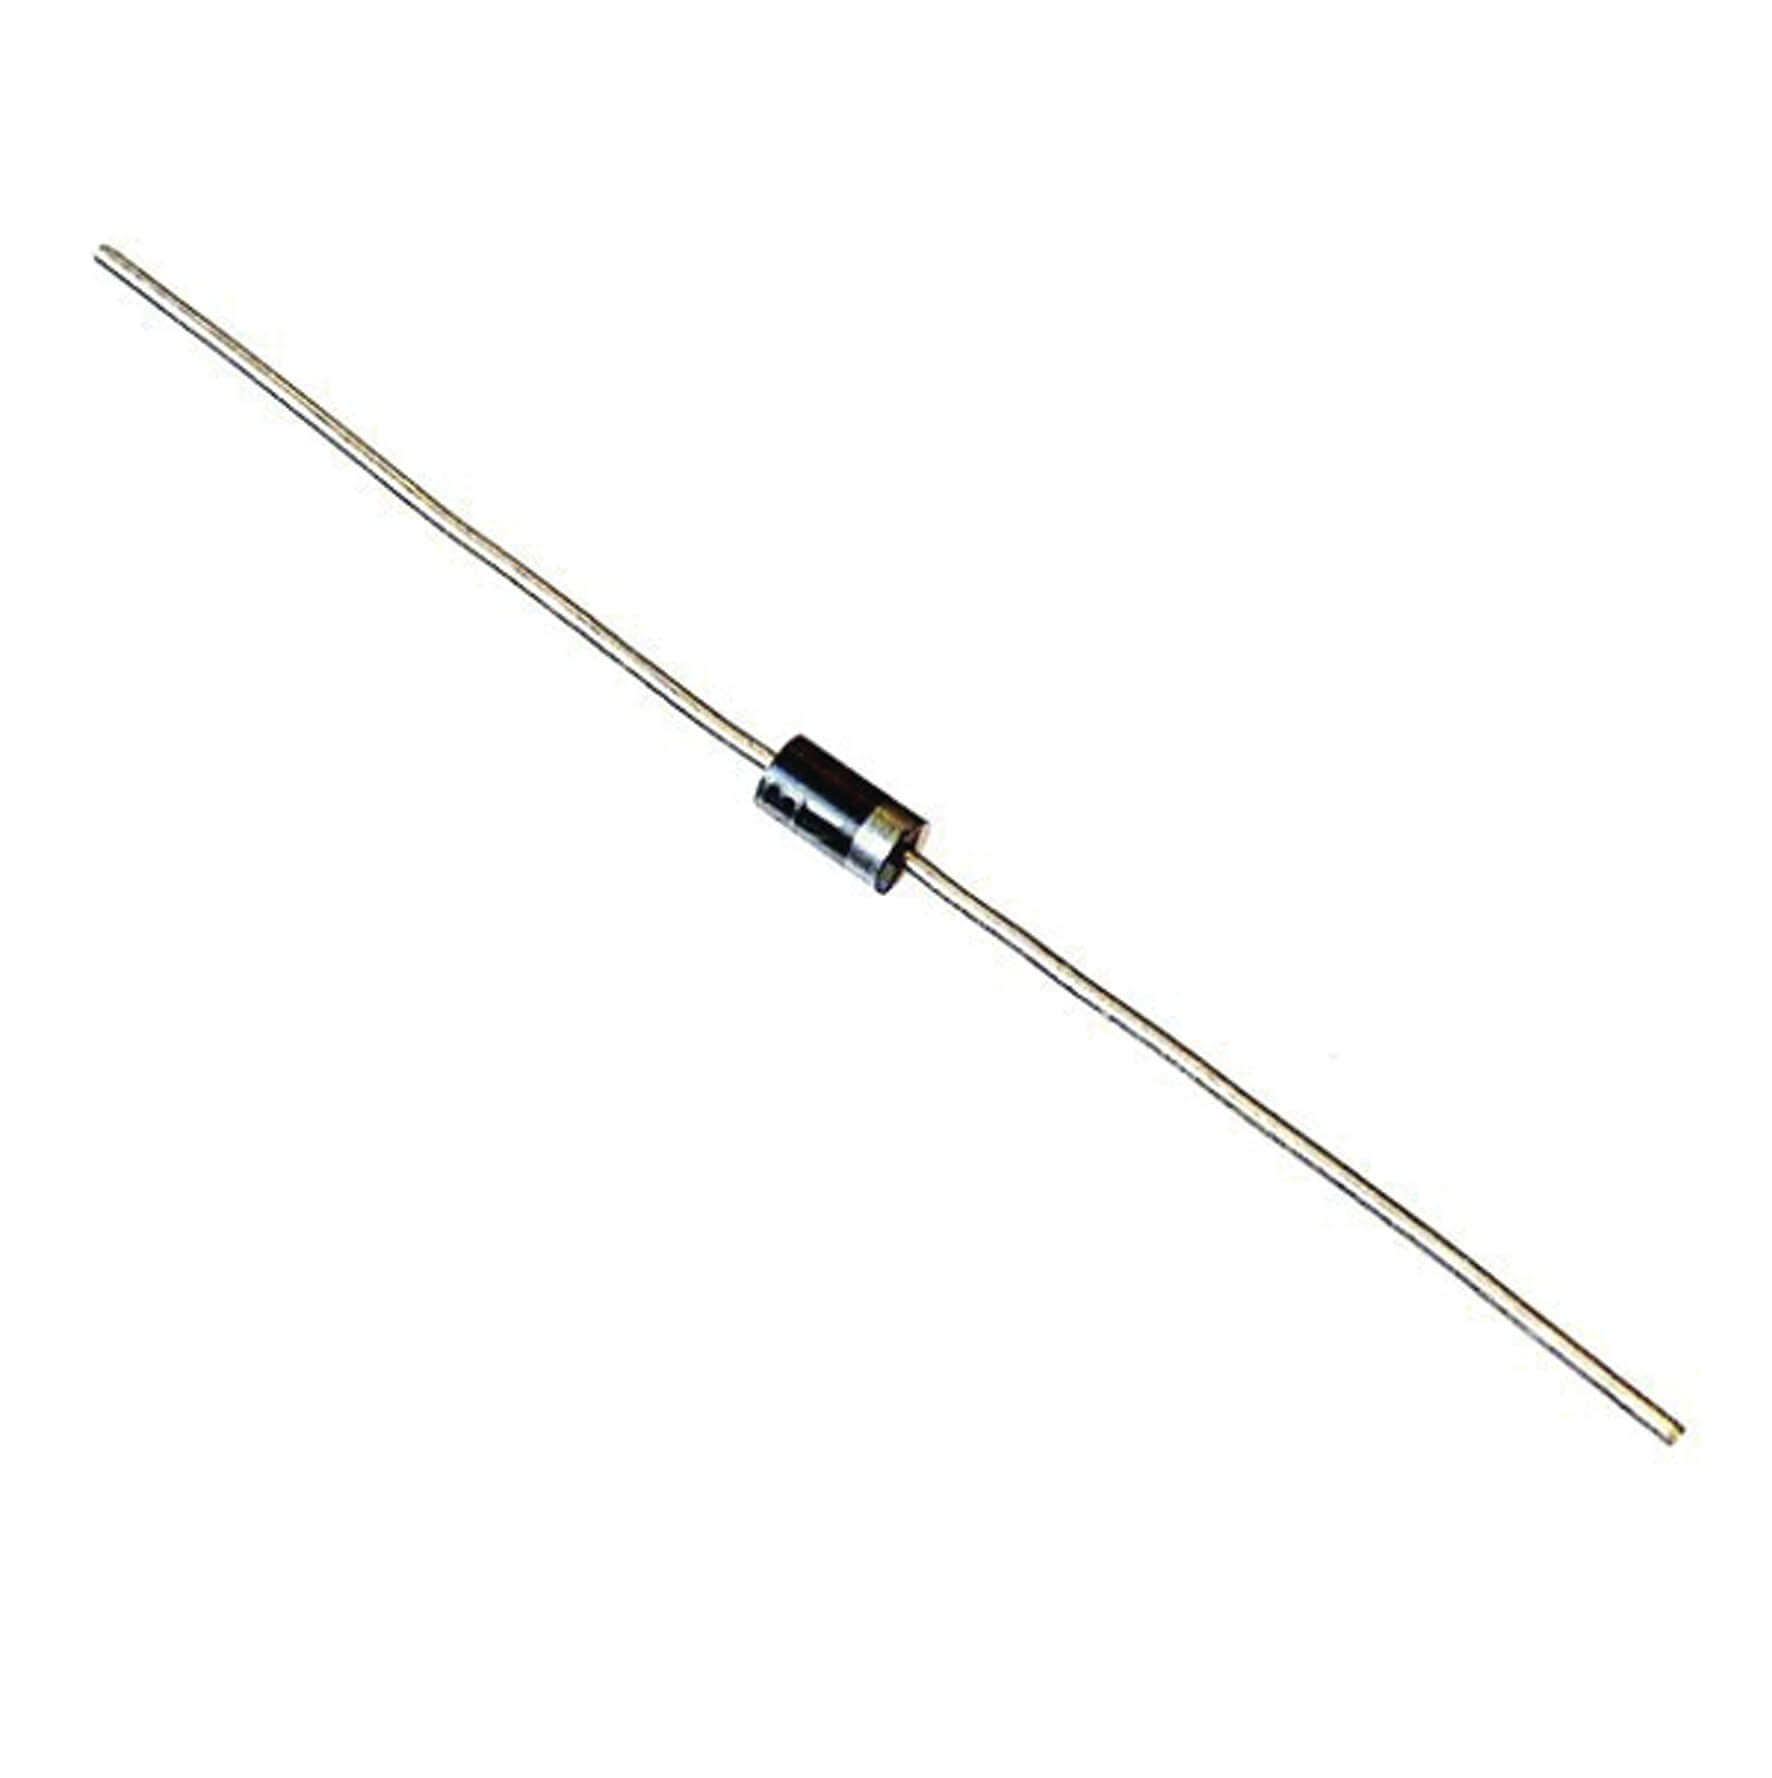 Rectifier Diode 1A - Pack Of 10